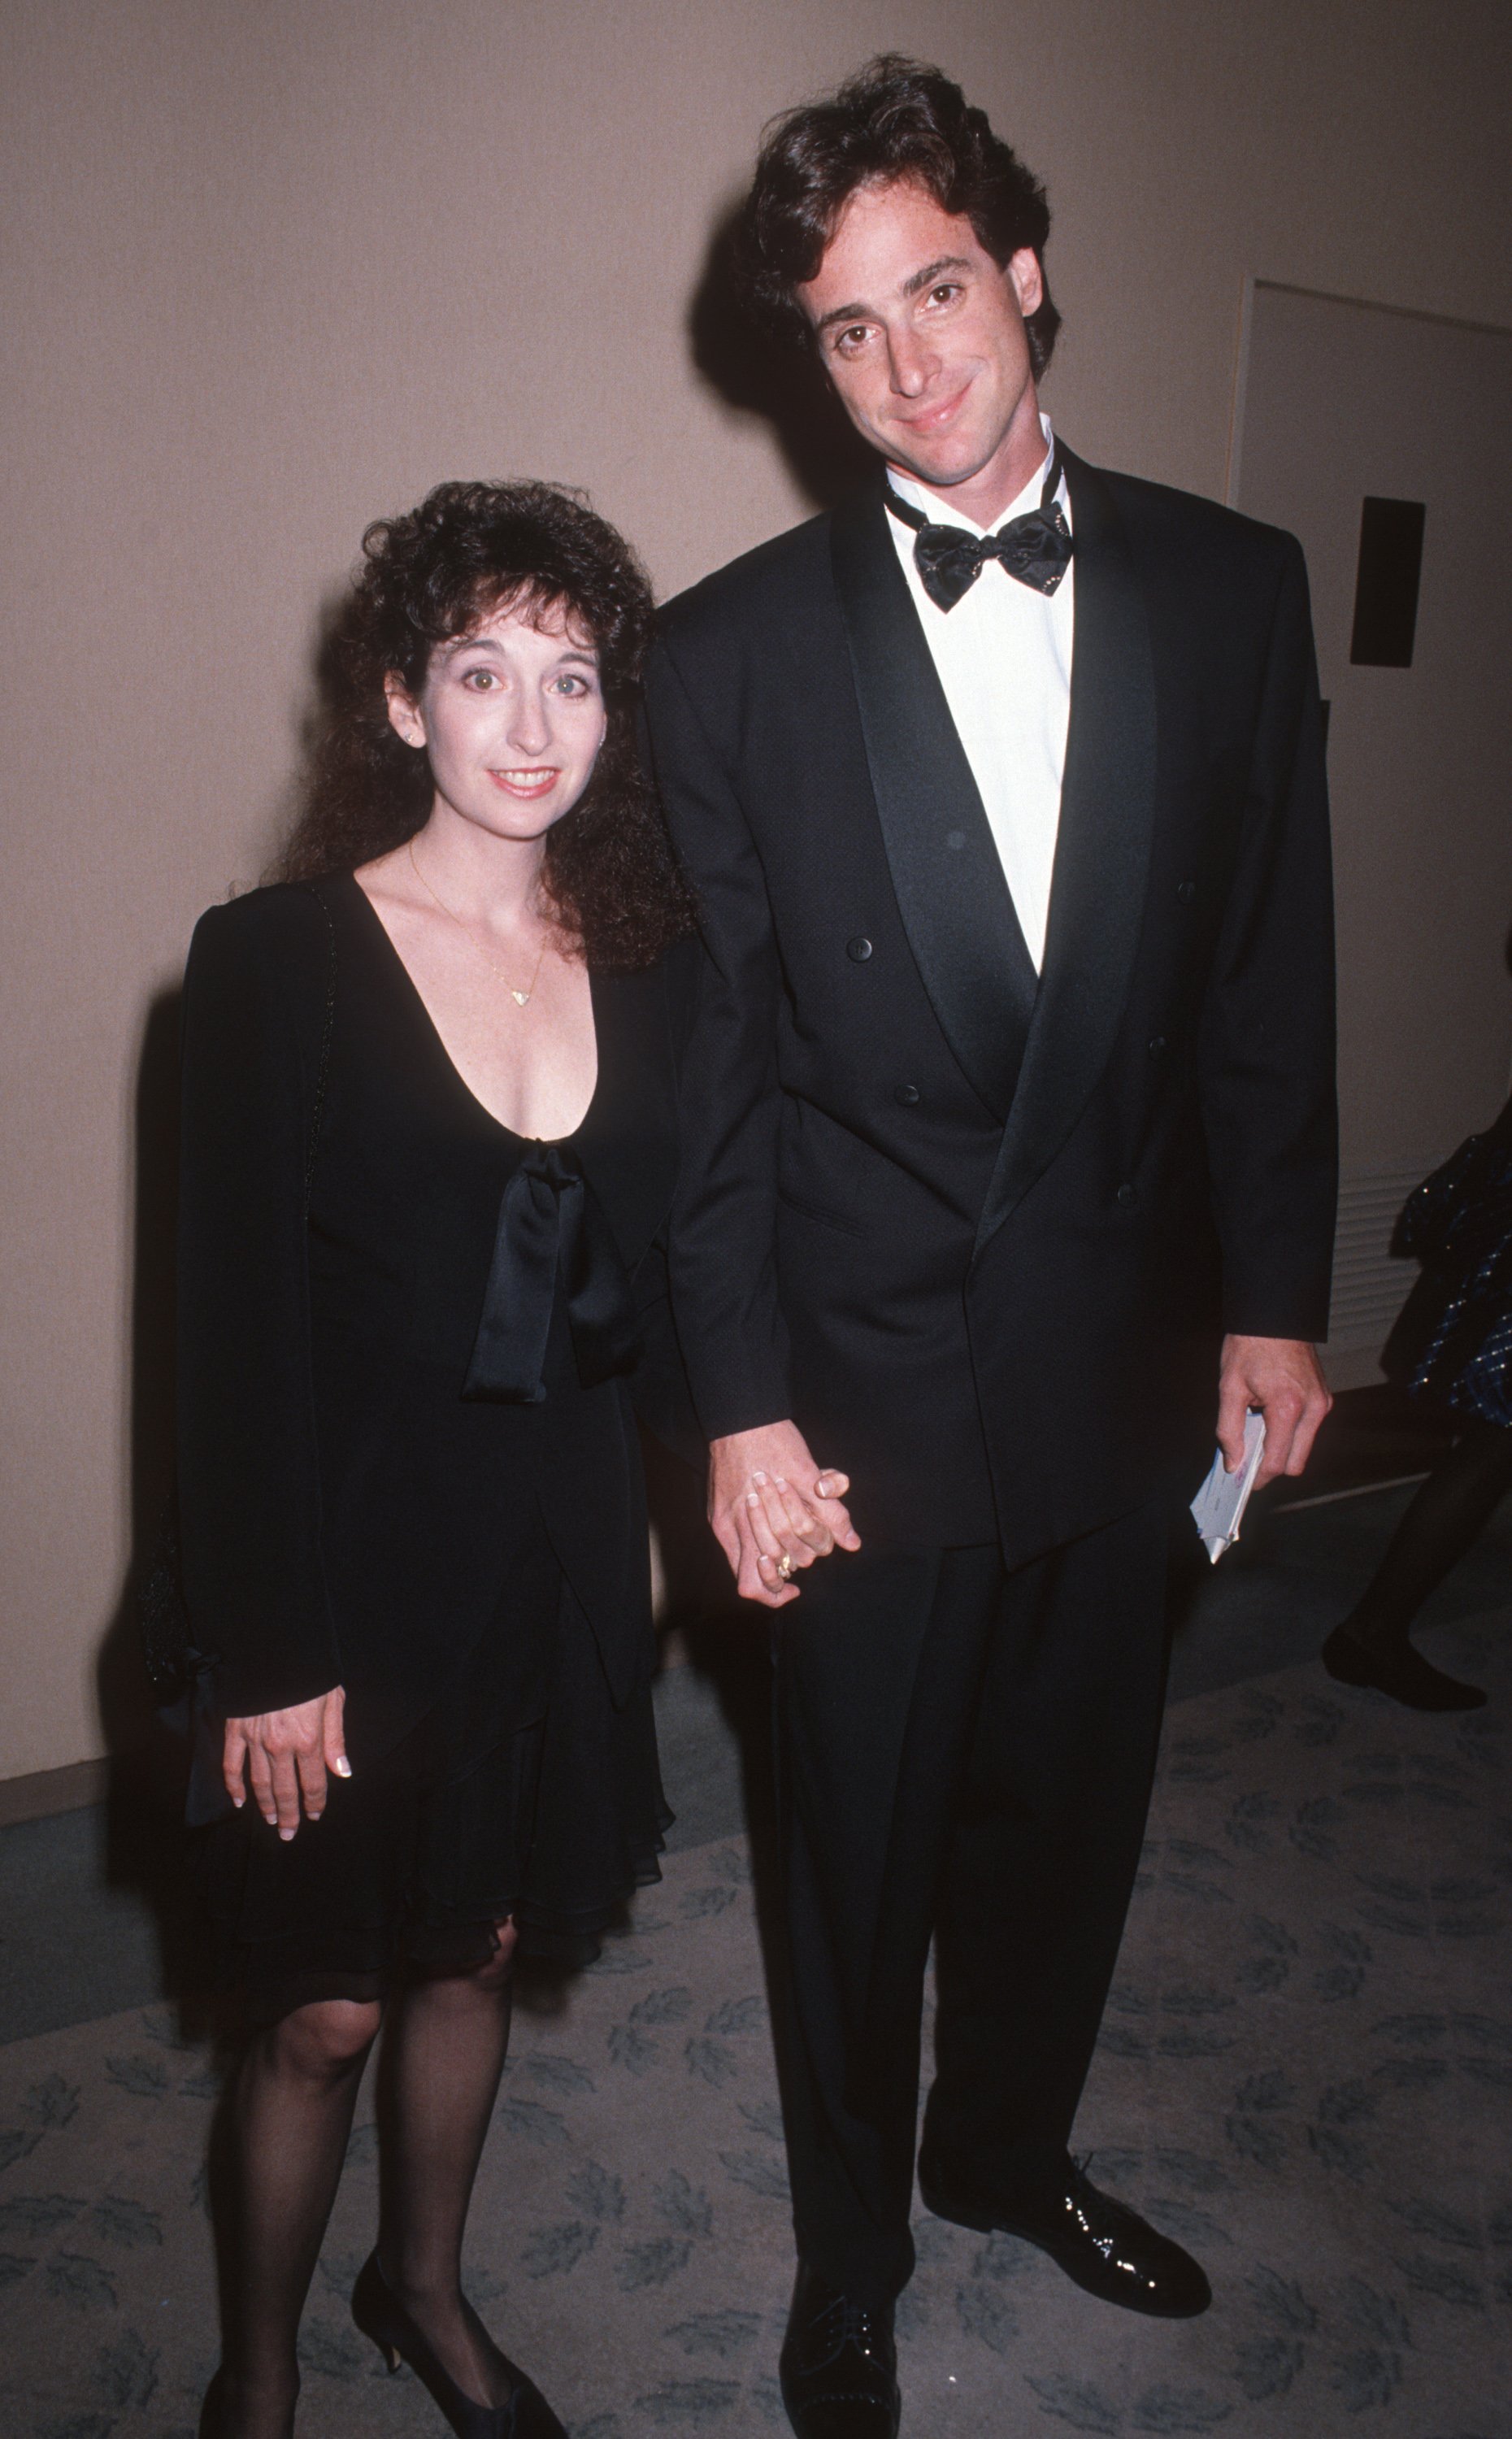 Actress Bob Saget and wife Sherri Kramer attending 'Carousel of Hope Ball Benefit' on October 26, 1990 at the Beverly Hilton Hotel in Beverly Hills, California. | Source: Getty Images